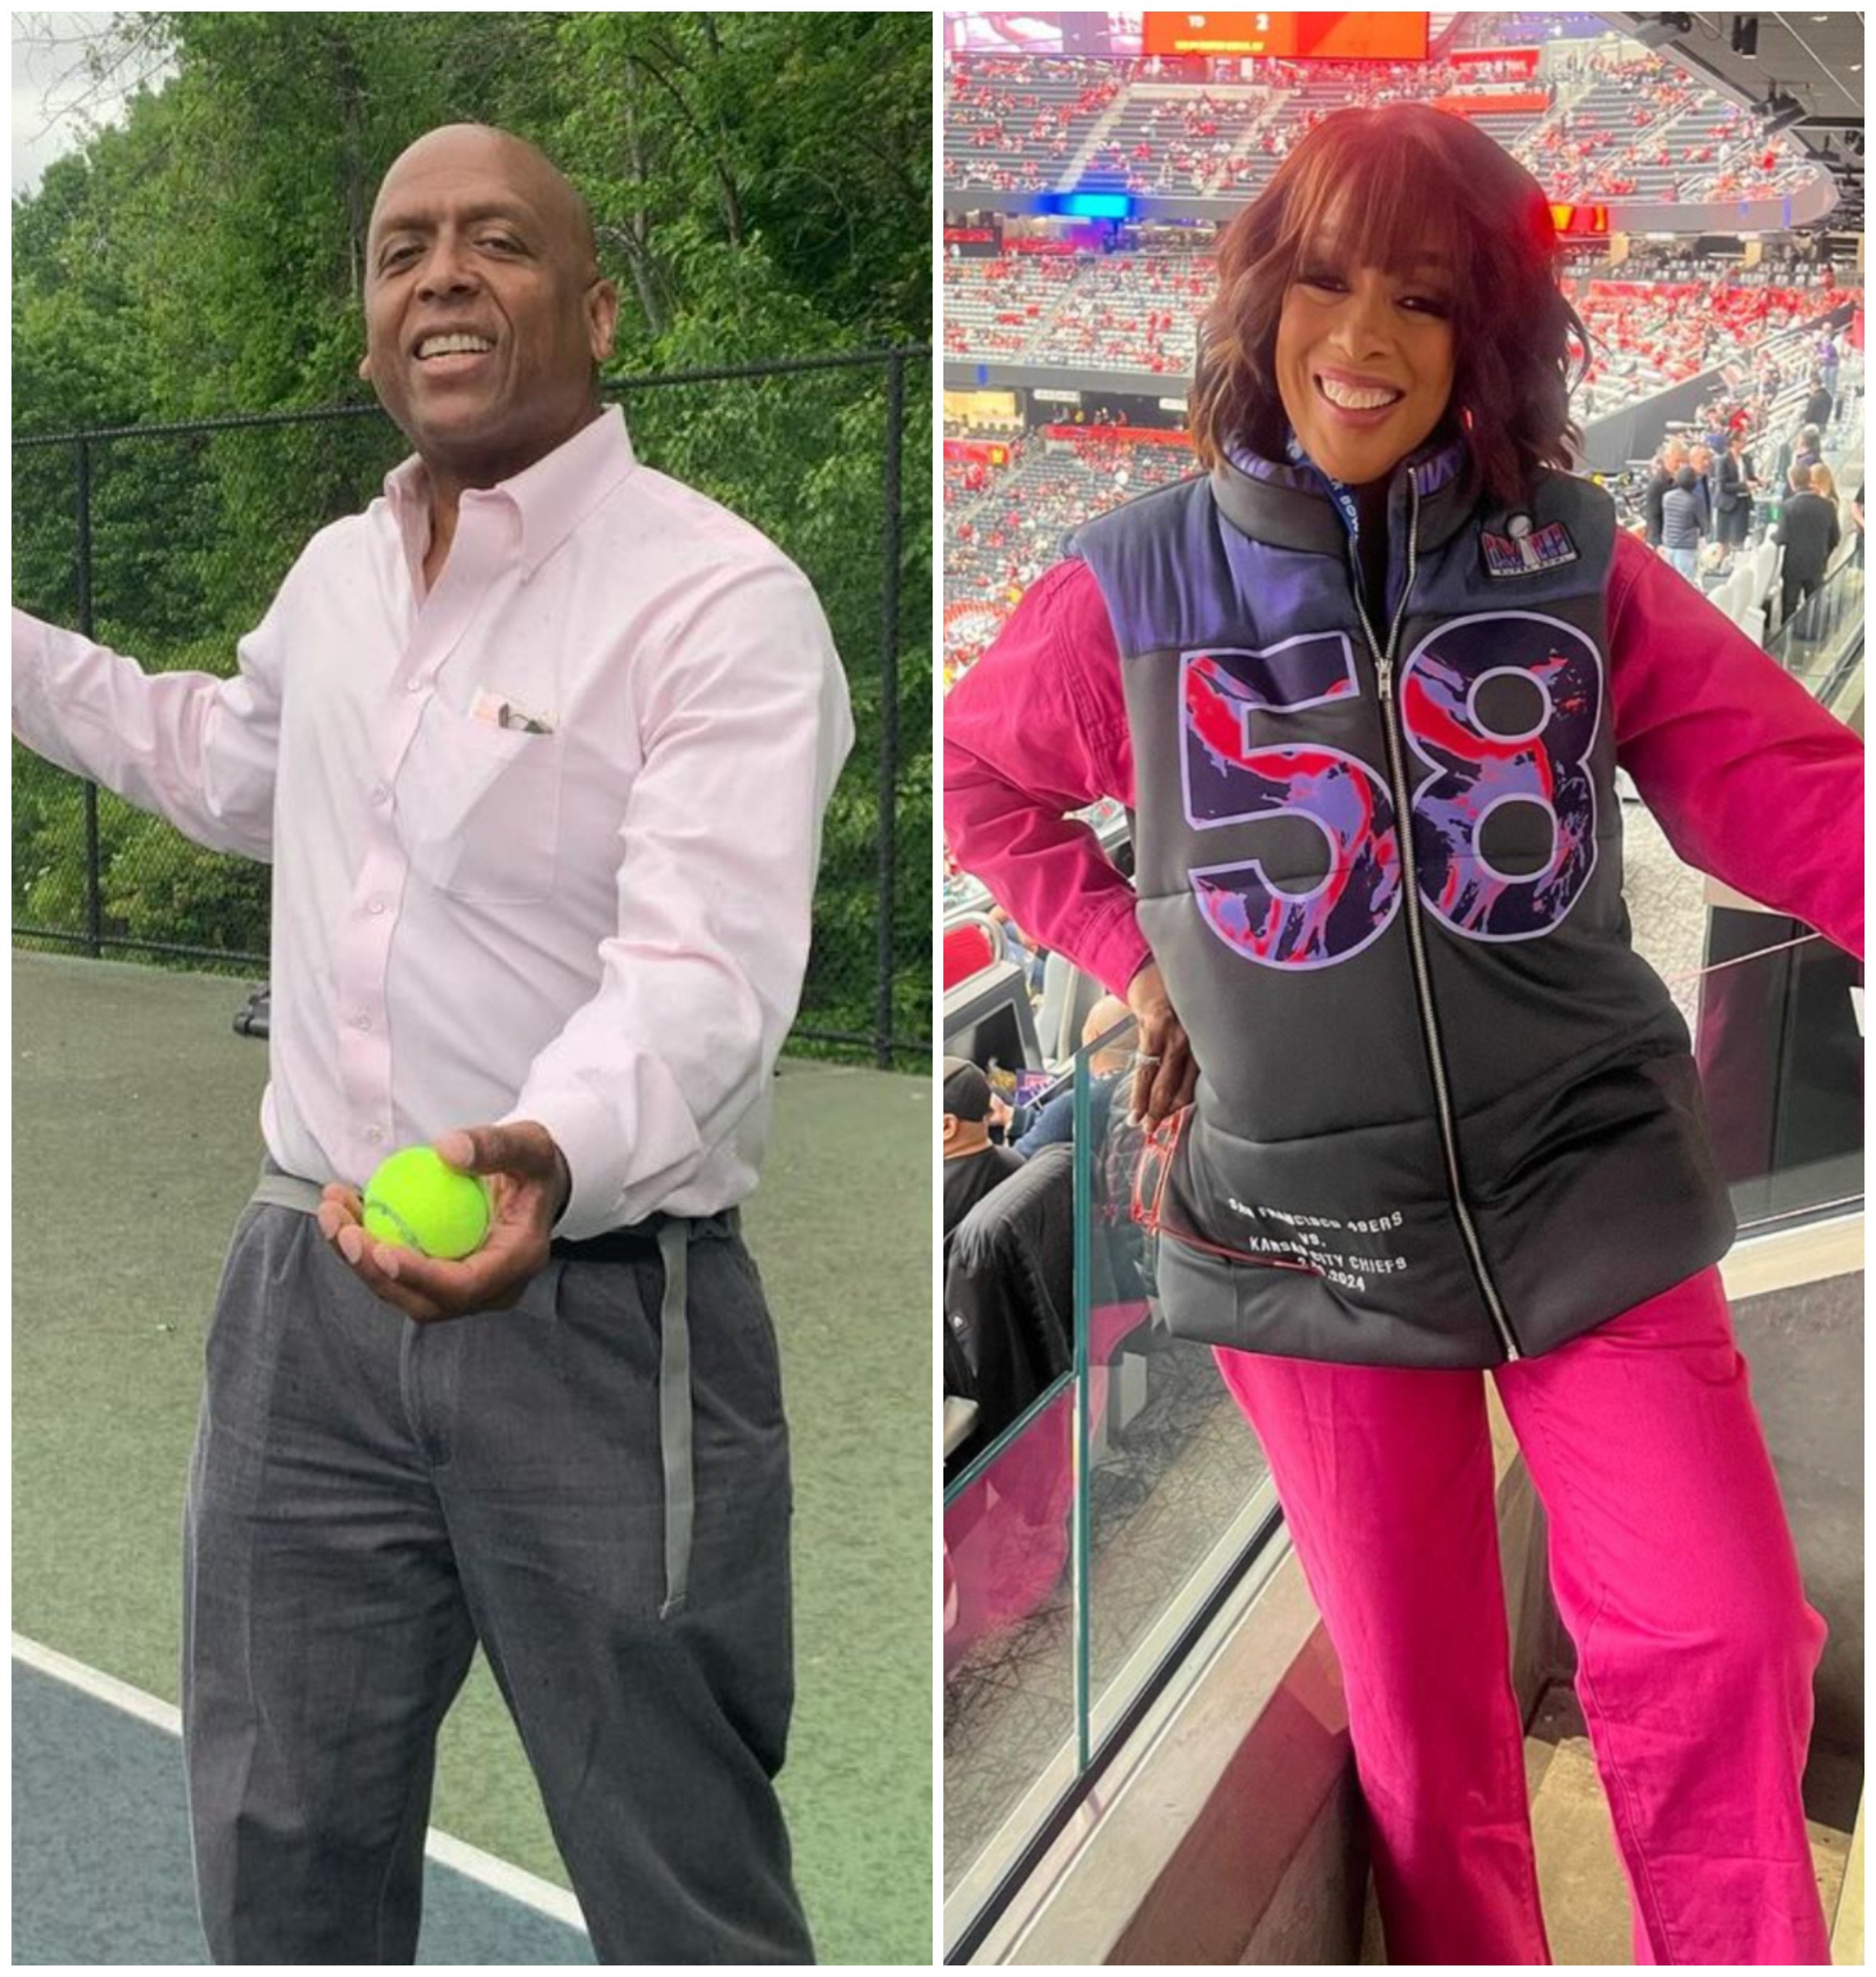 William Bumpus was married to Gayle King for 11 years, and still has nothing but praise for the CBS Mornings host. Photos: @william.bumpus, @gayleking/Instagram